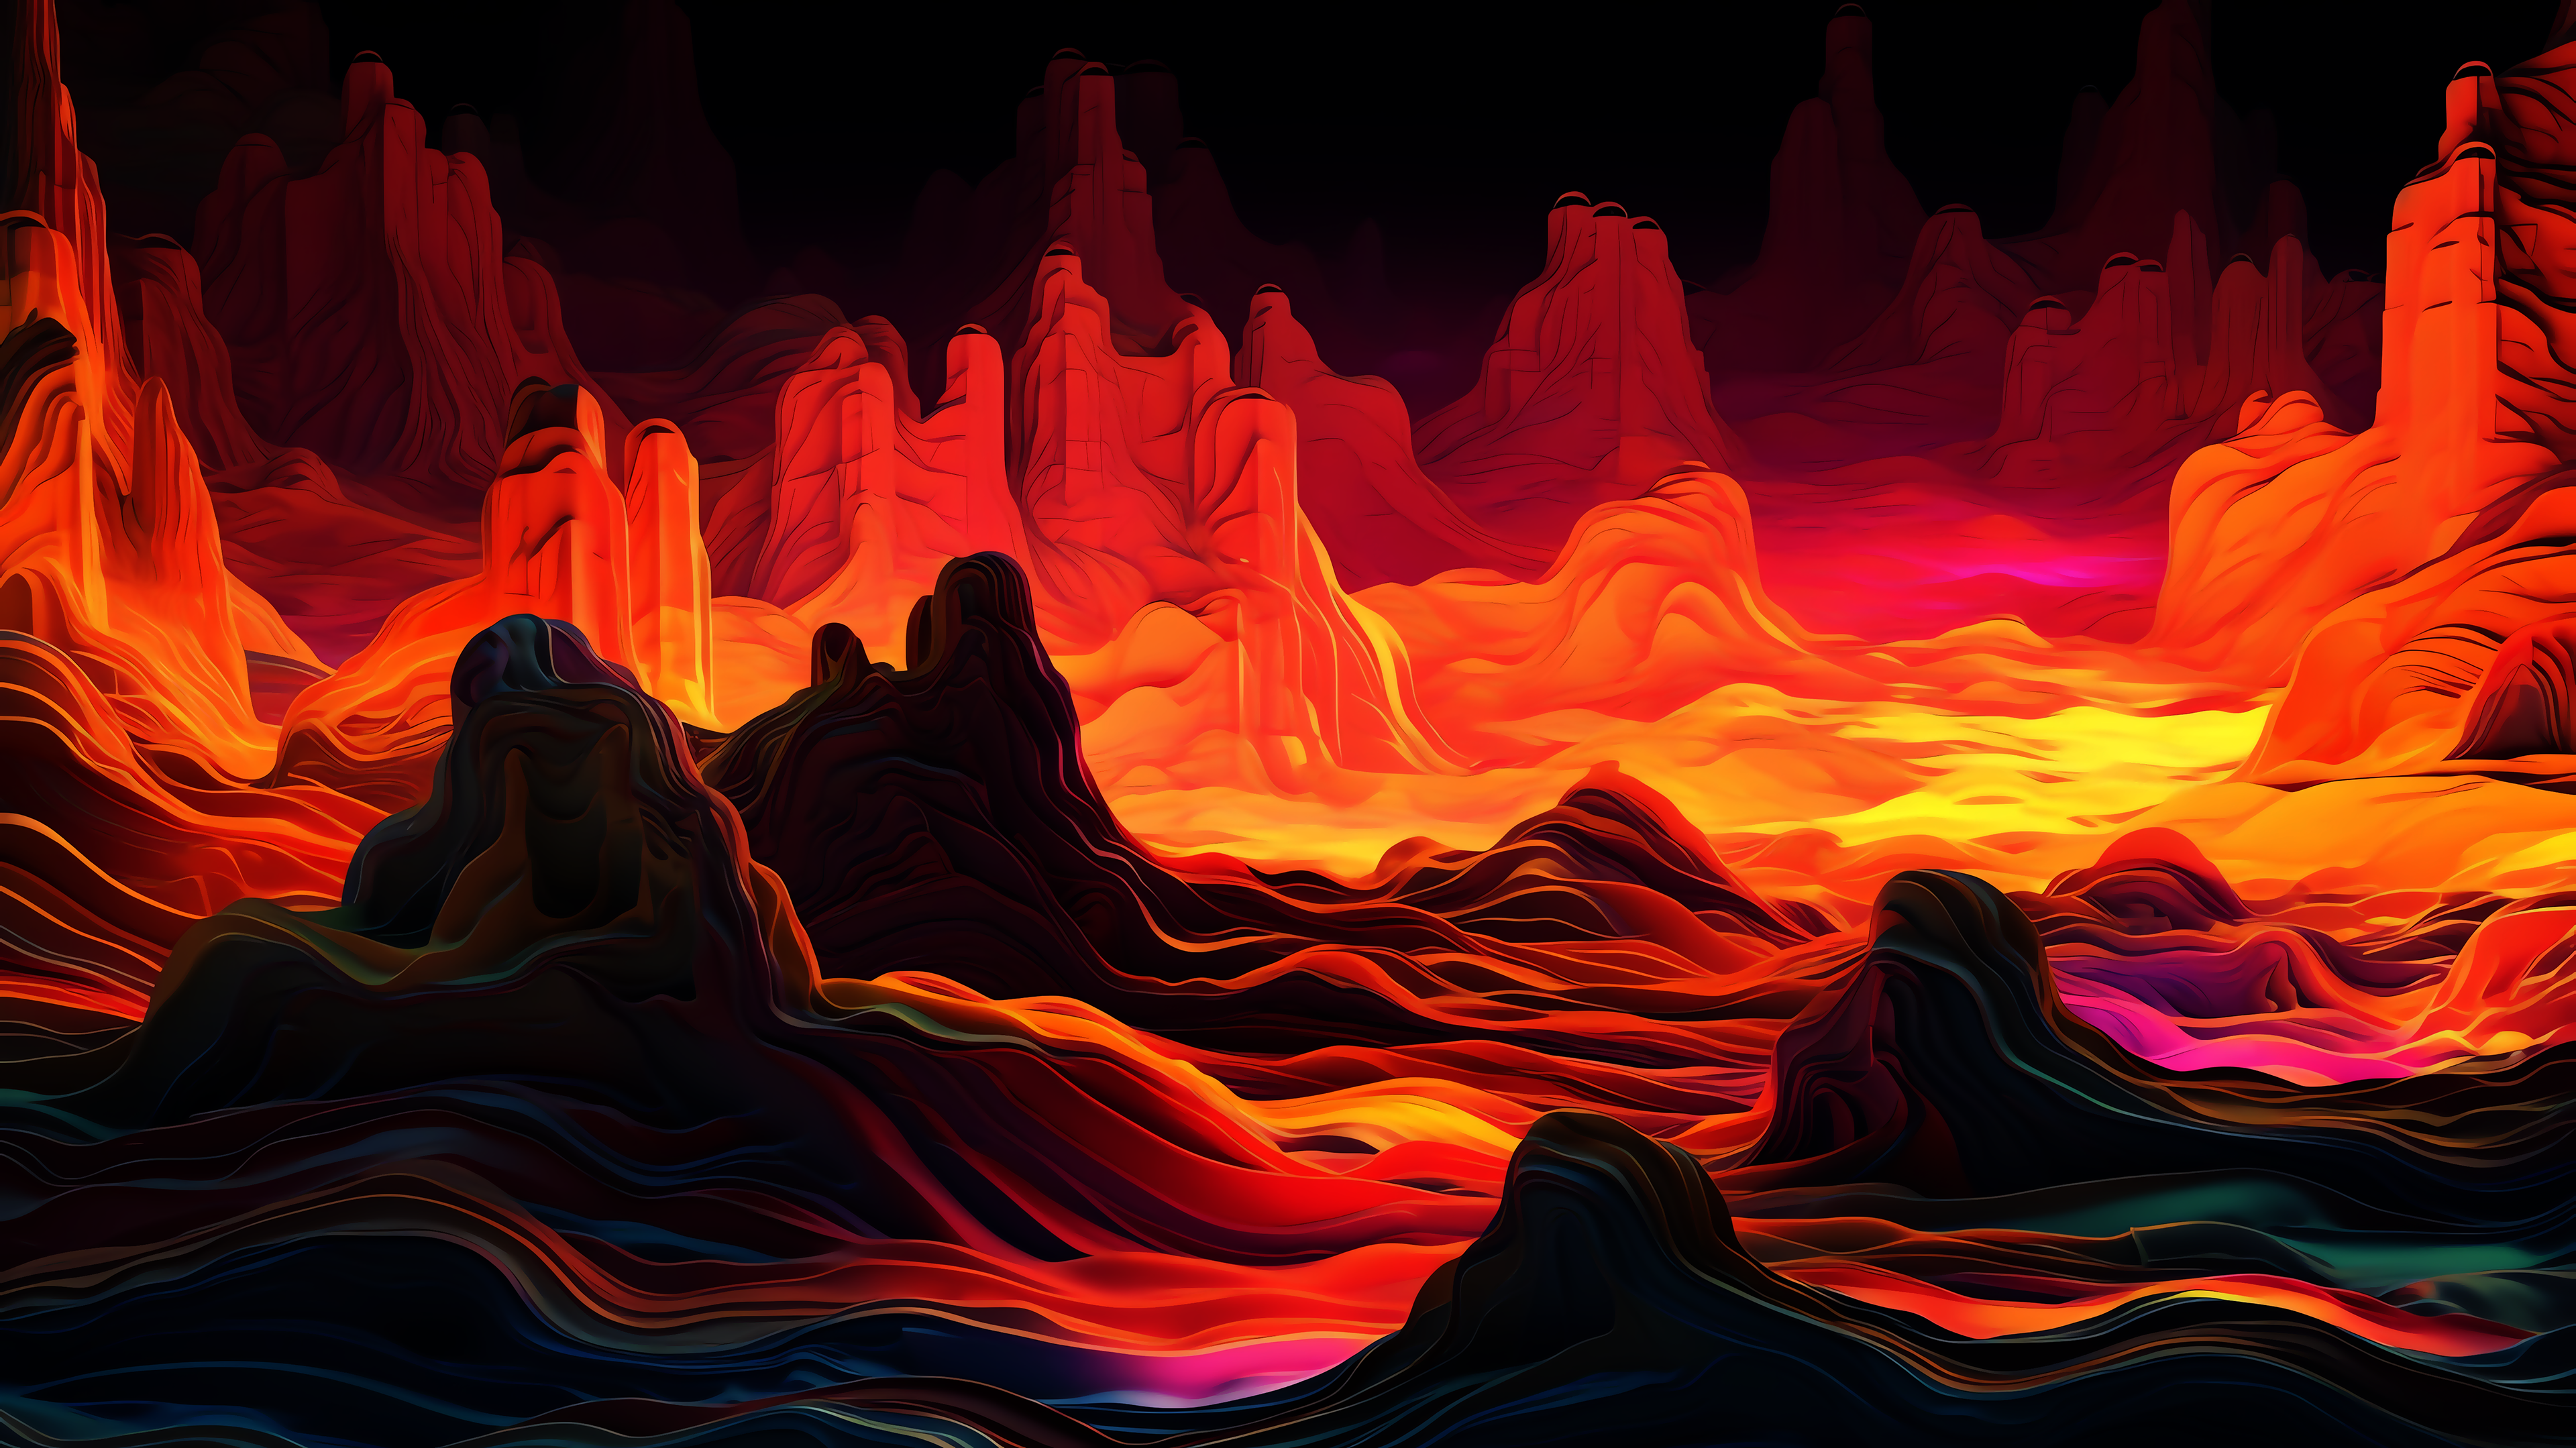 PC WALLPAPER 4K ABSTRACT DESIGN CAVE AND VOLCANIC LAVA